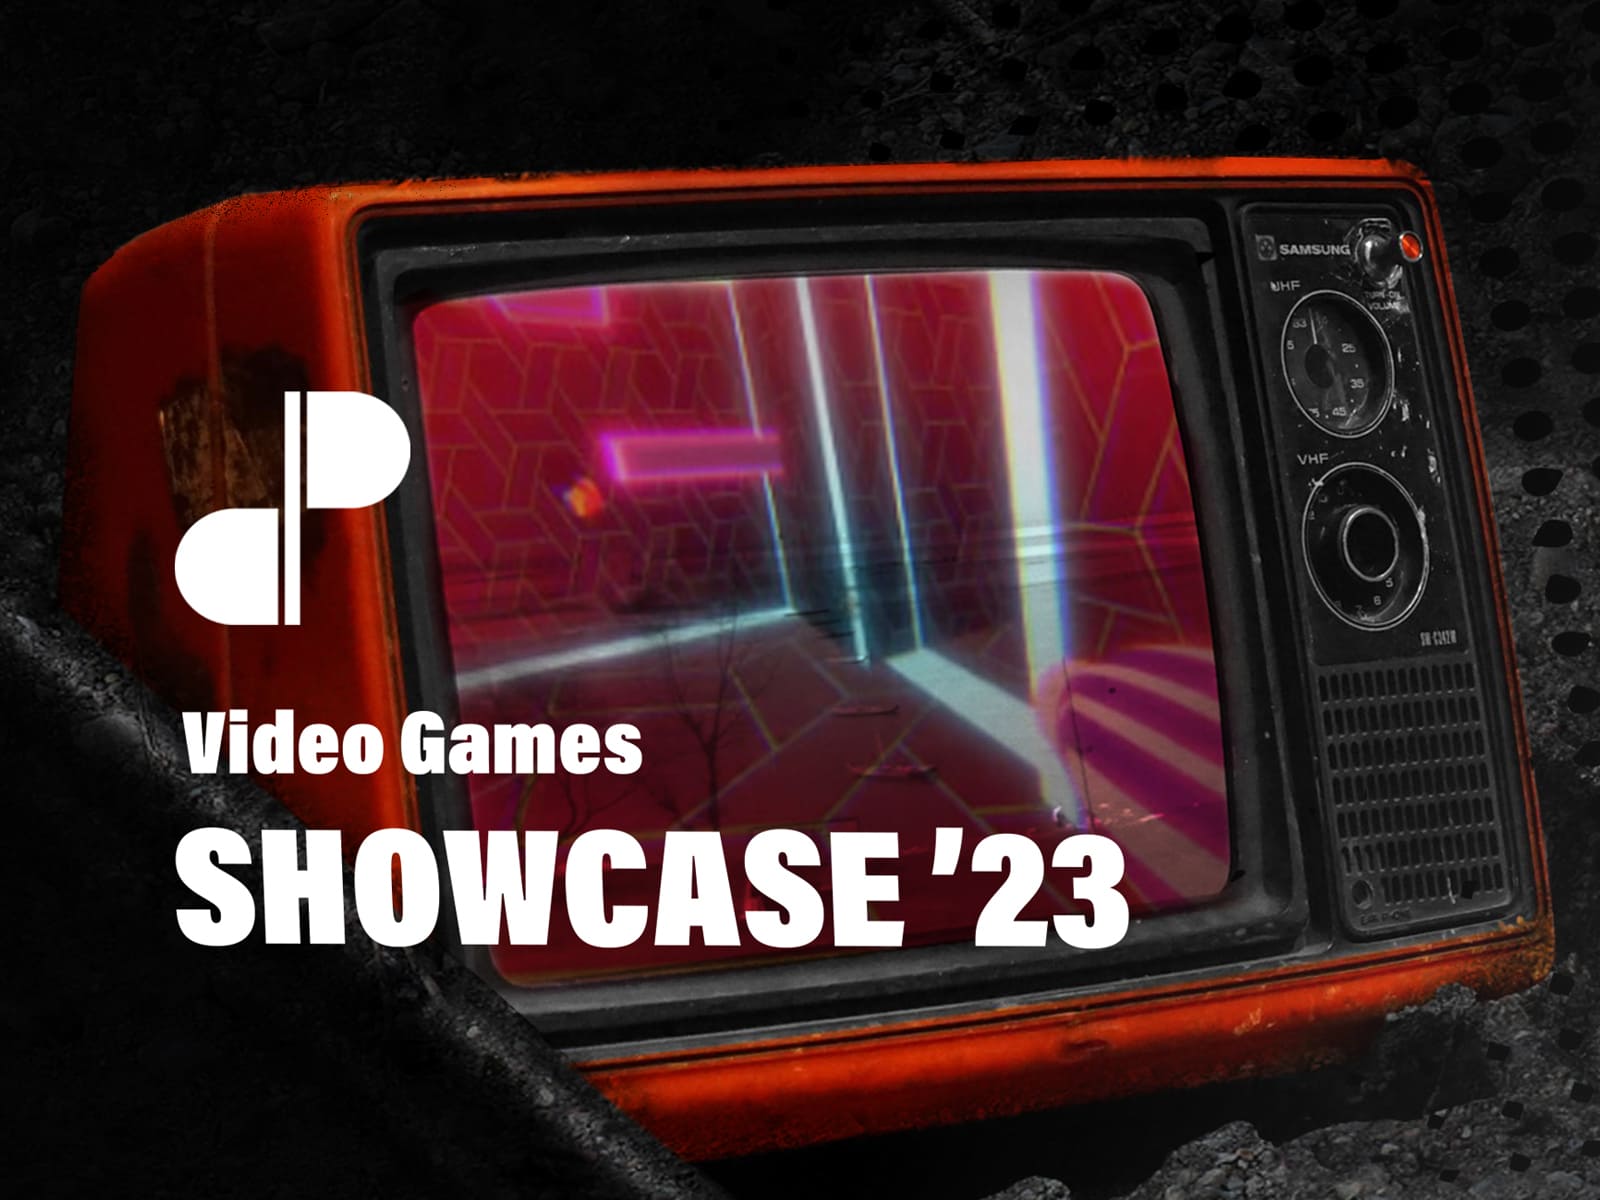 A Banner composed of the image of an old red television displaying a futuristic video game image with the Dragons shield of DigiPen, and a text that says: Video Games Showcase 2023